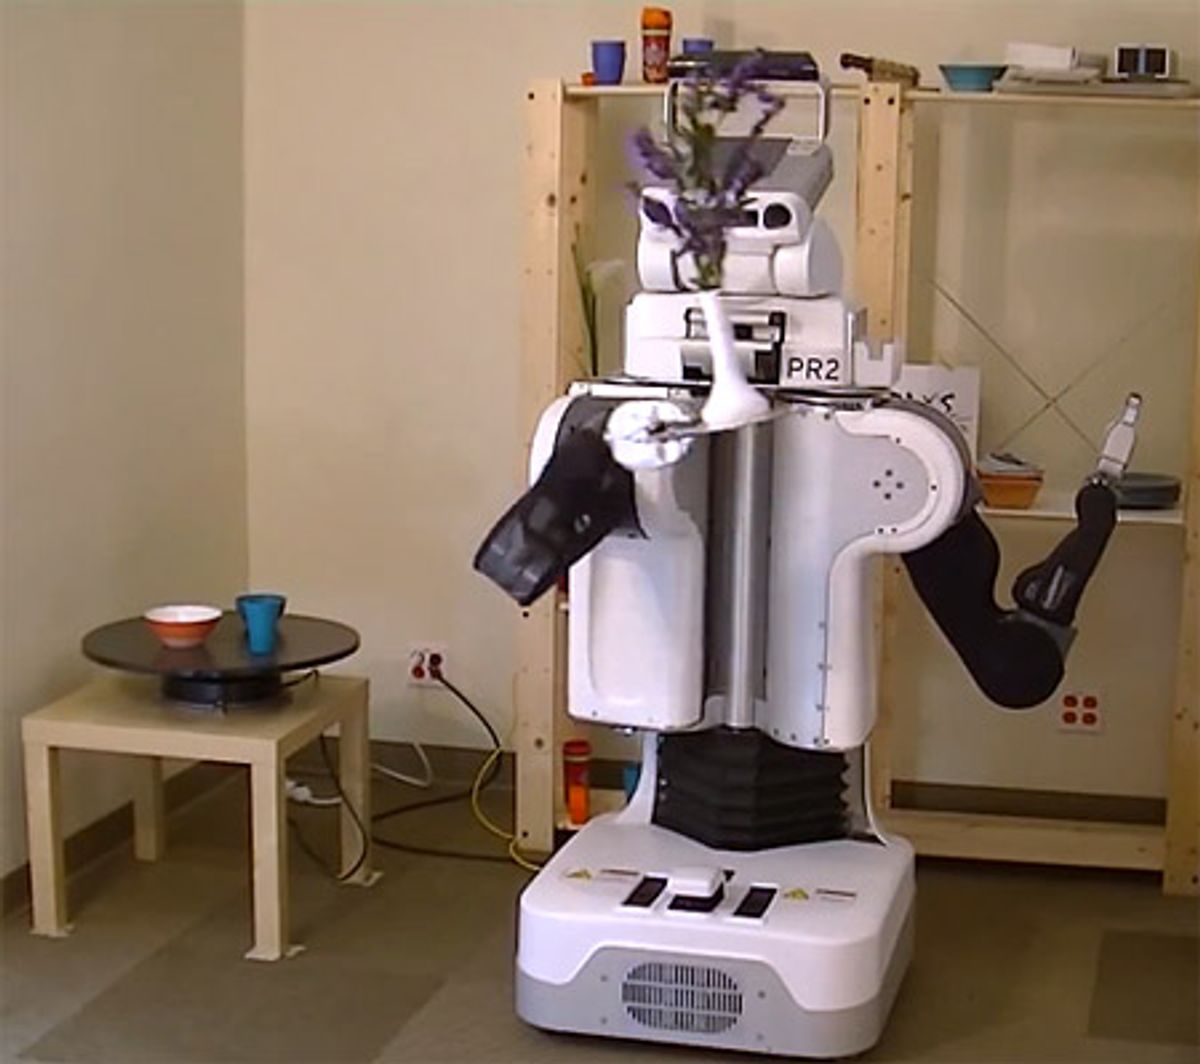 PR2 Learns How To Be a Robobutler Without Destroying Things